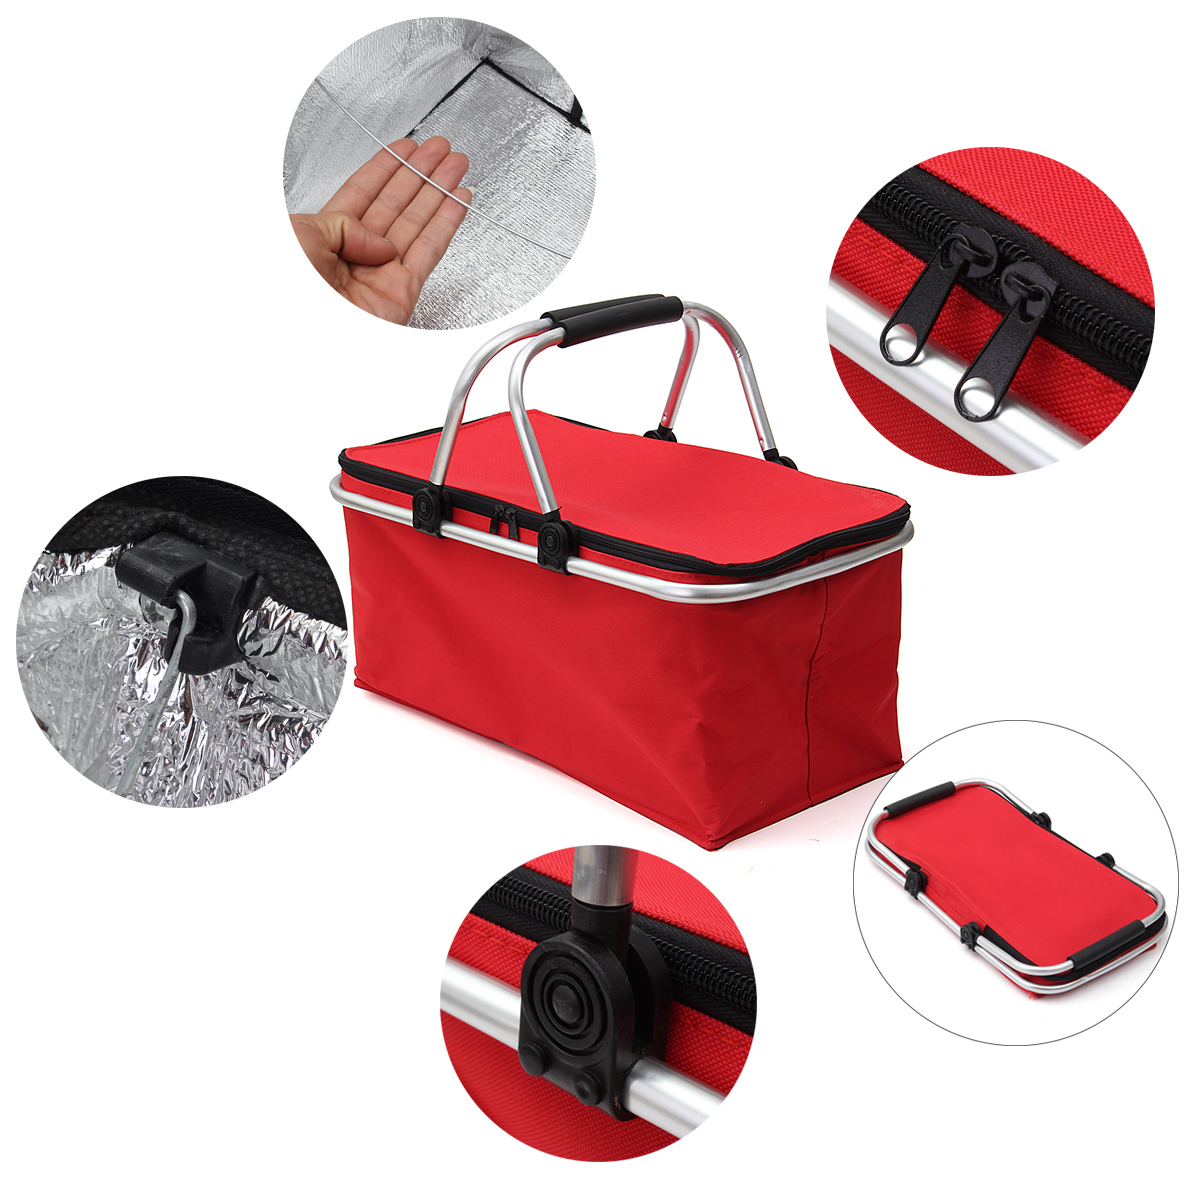 30L Large Folding Insulated Thermal Cooler Bag Picnic Camping Lunch Storage Baskets